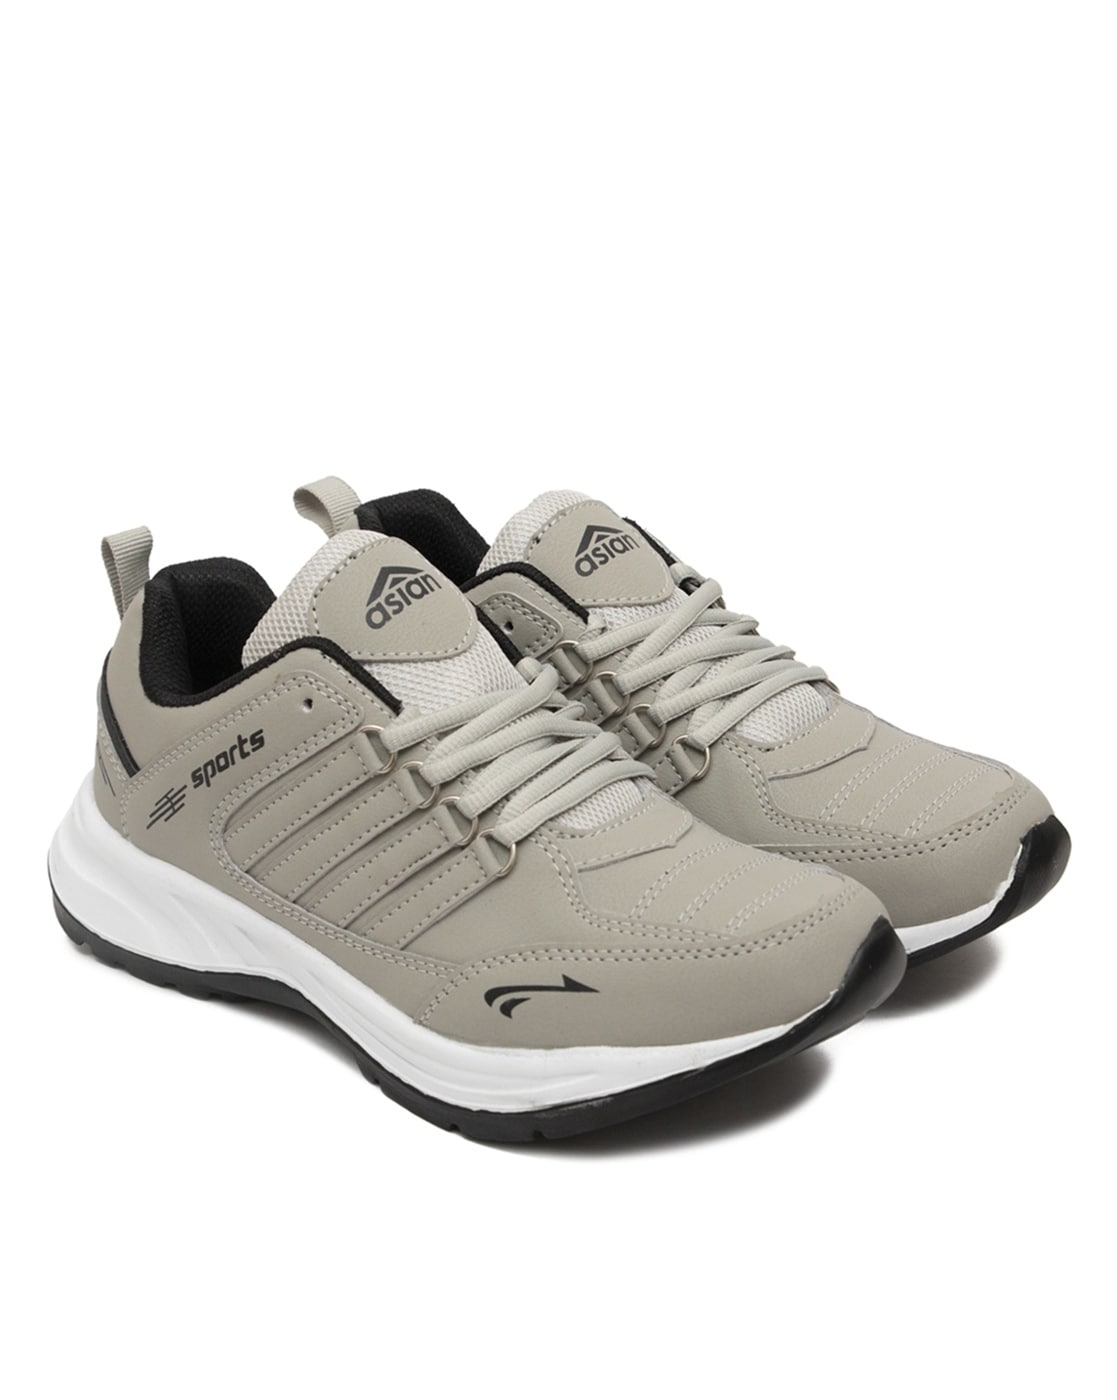 Buy Grey Sports Shoes for Men by ASIAN Online 